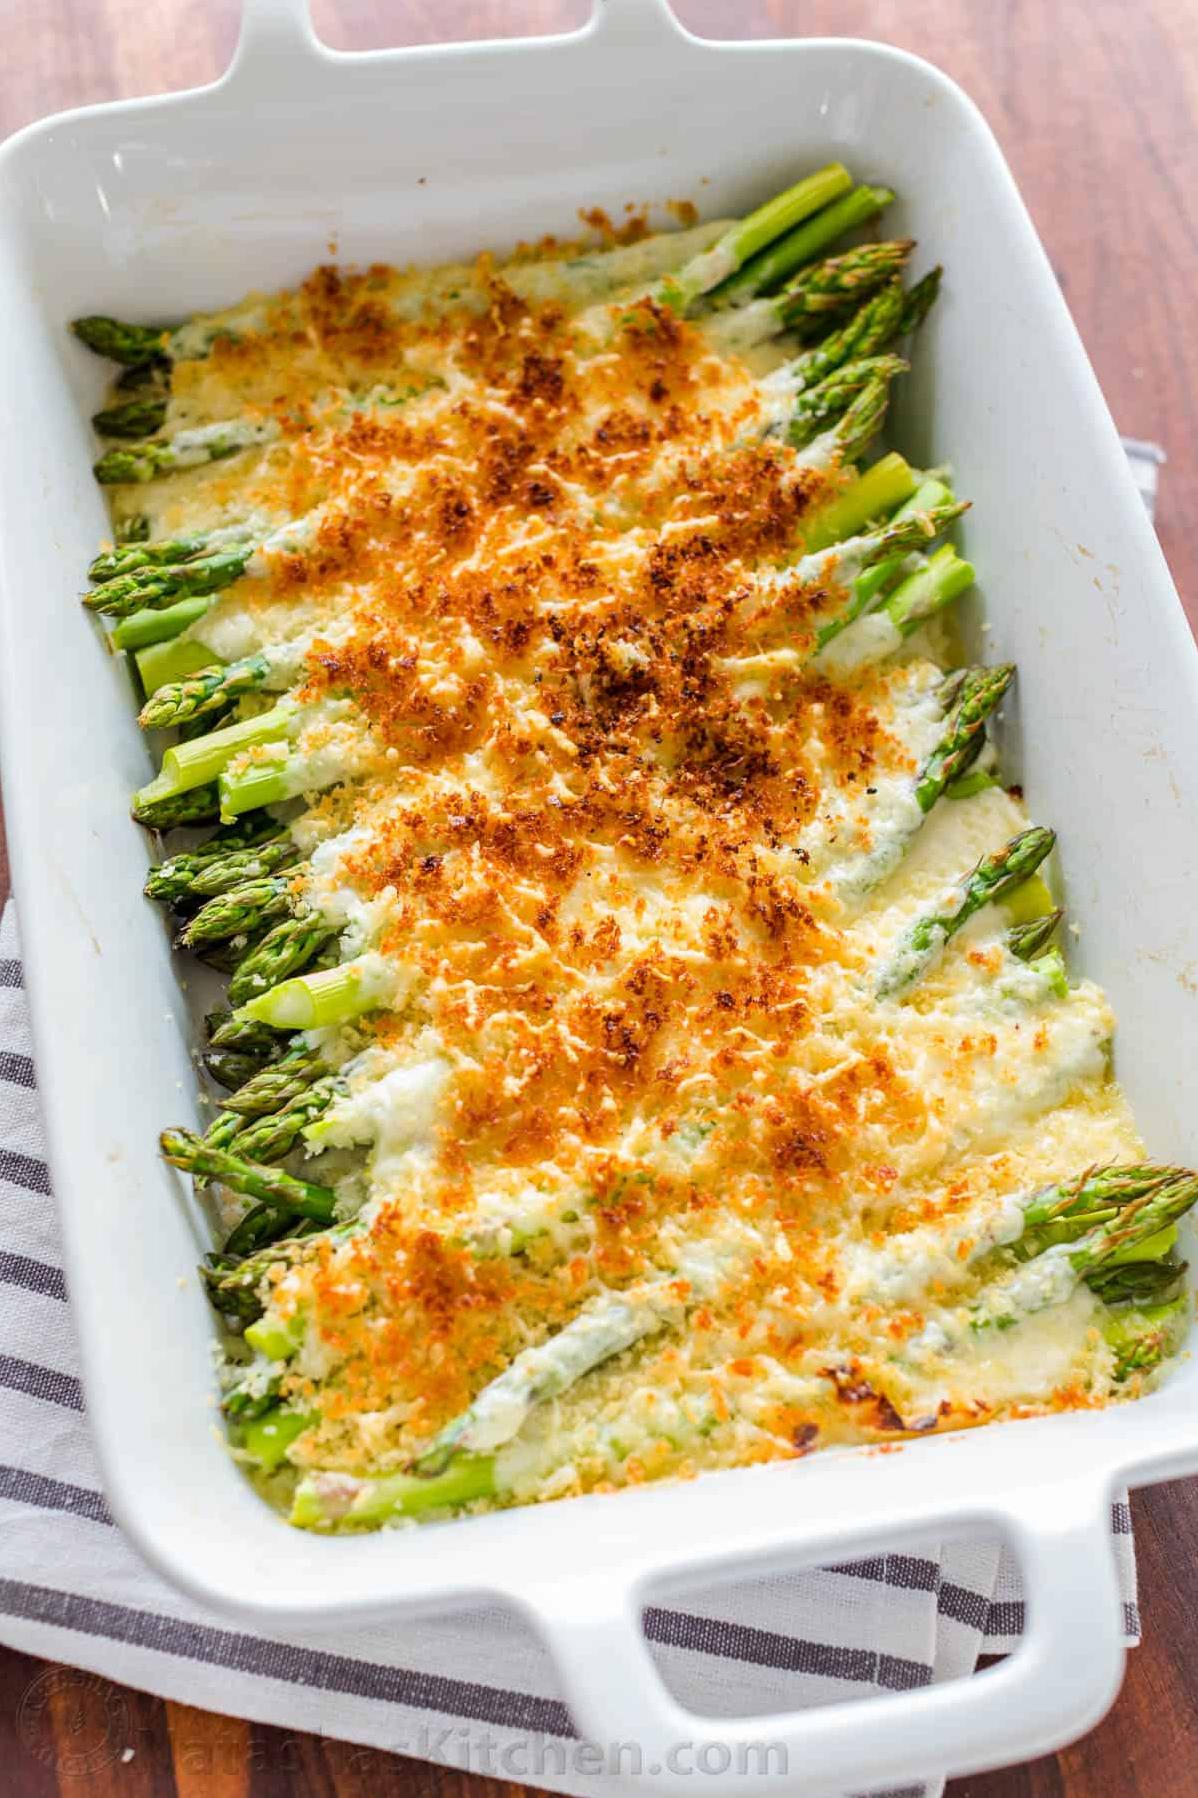  Elevate your usual asparagus game with this easy and foolproof recipe.